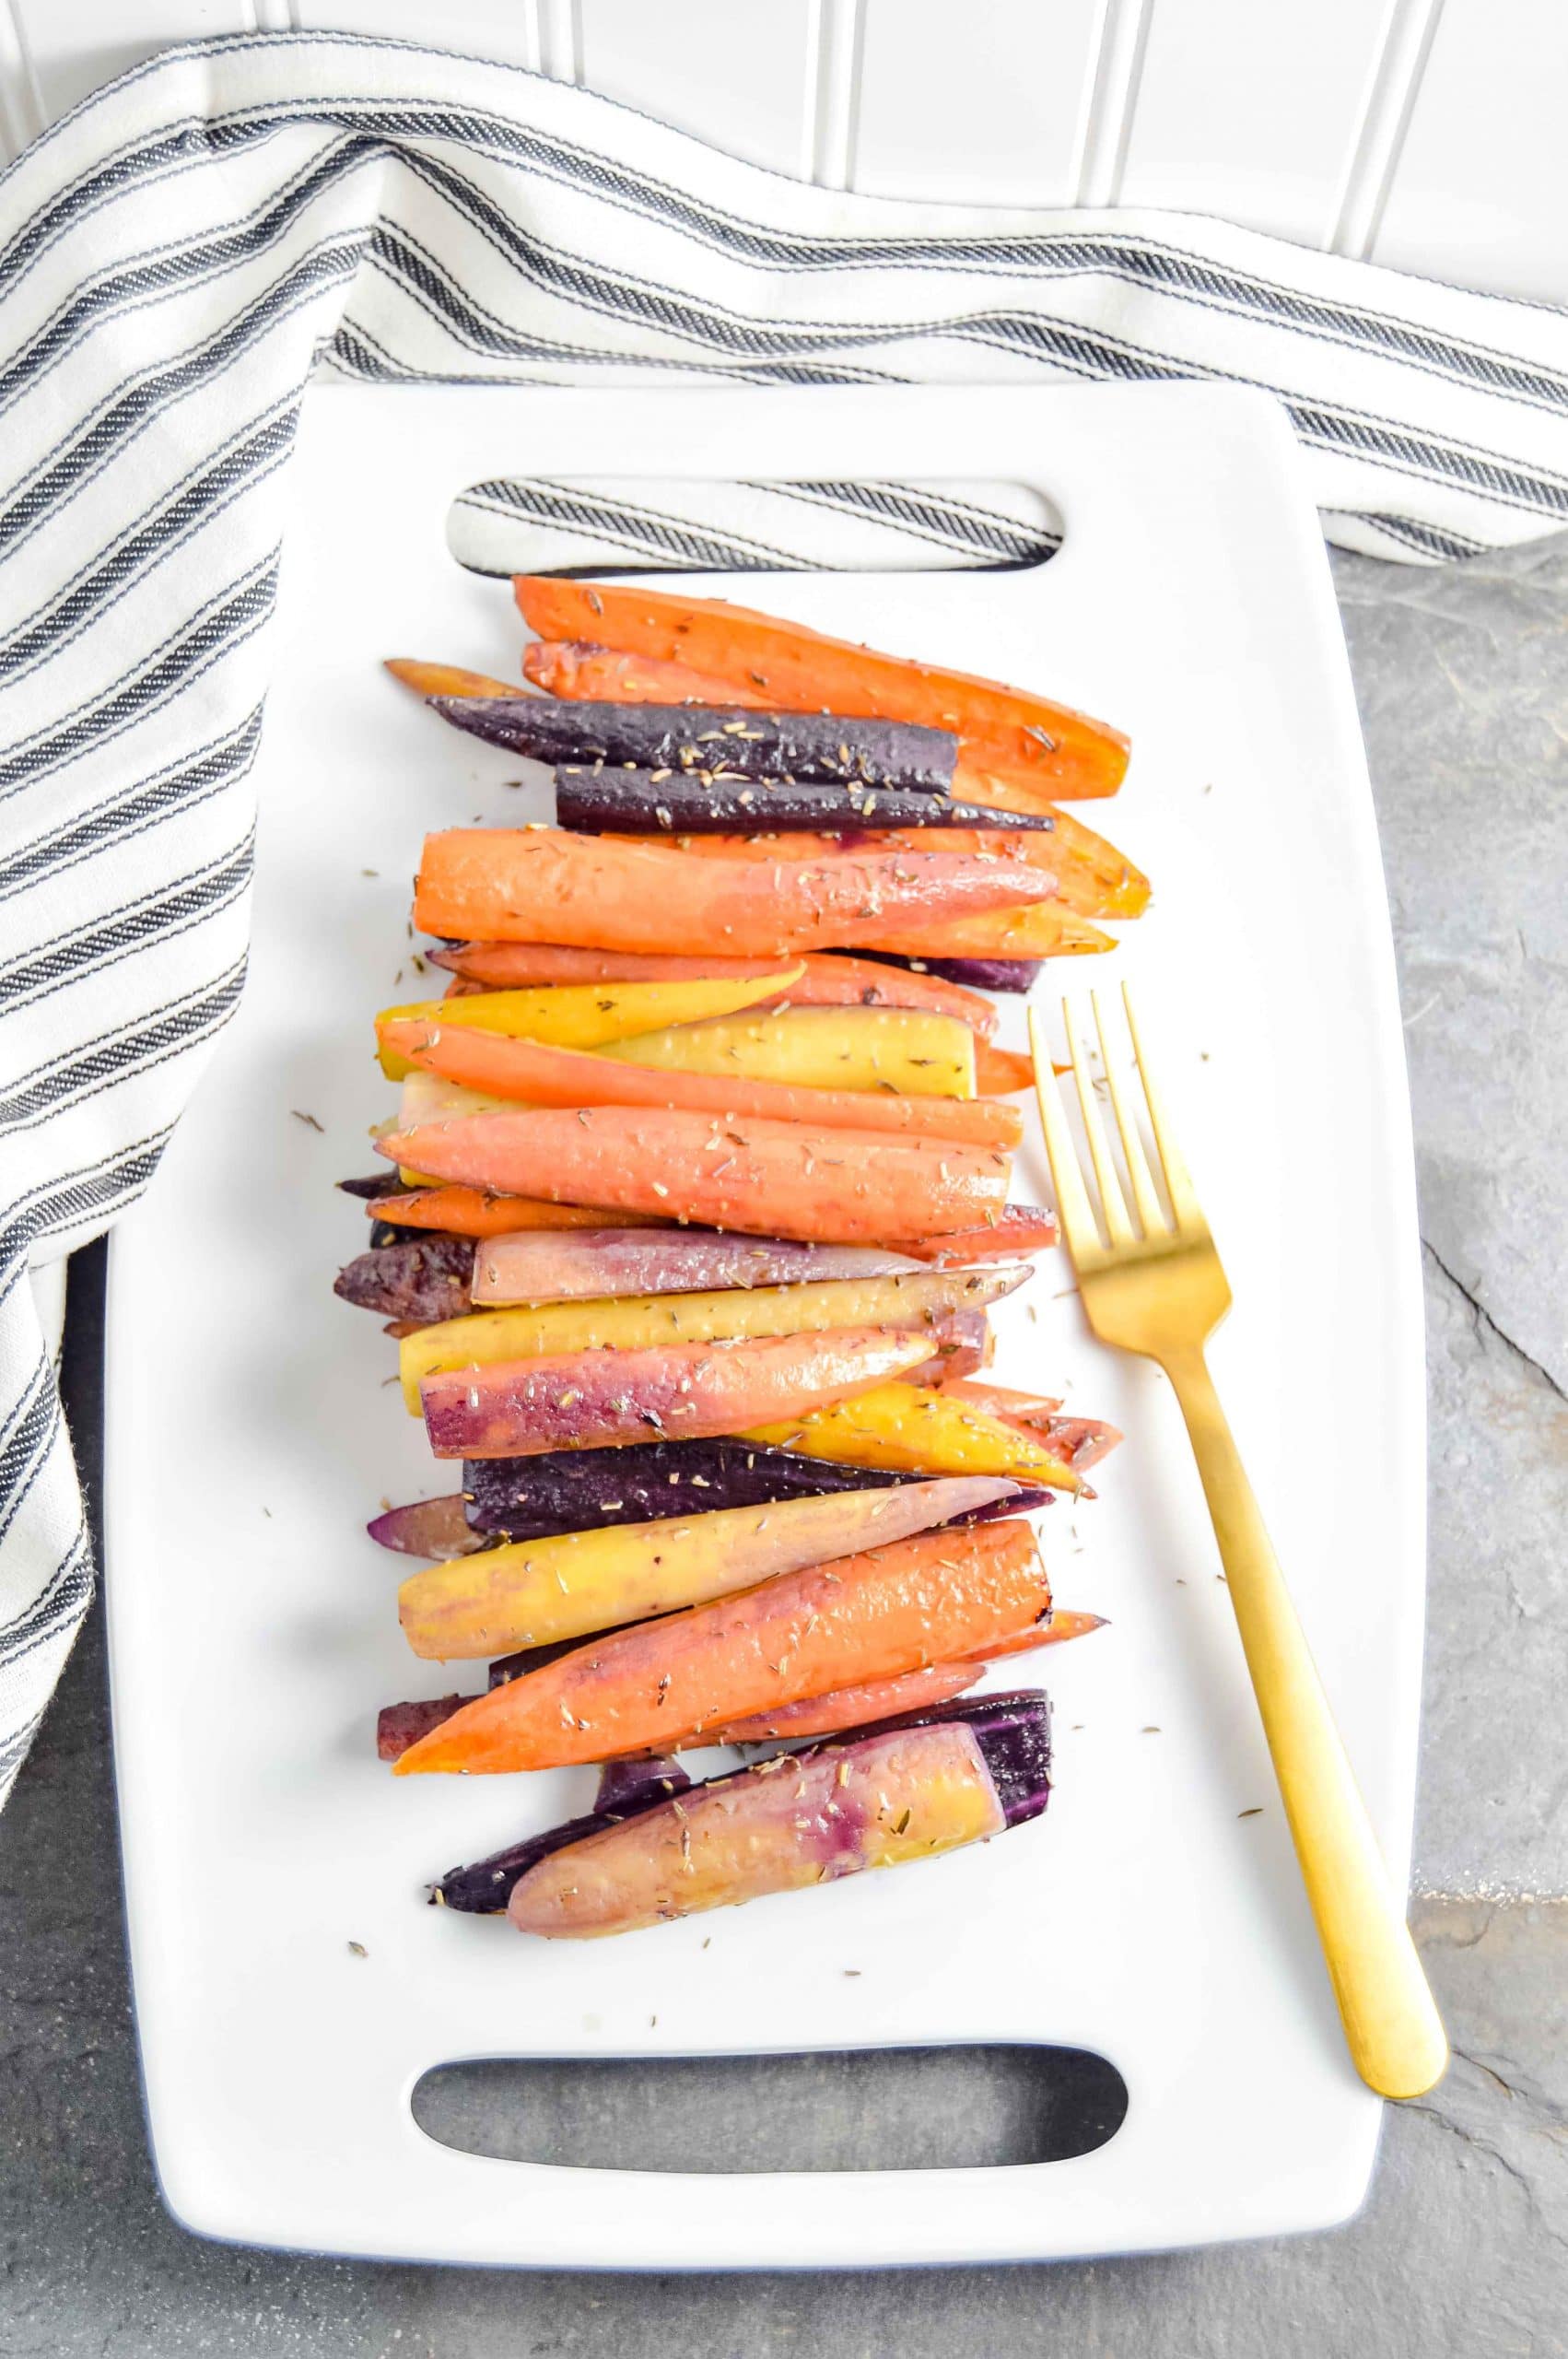 Image of a side angle view of Perfectly Roasted Carrots on a rectangle white plate with a gold fork.  The plate sites on a gray blue background with a black and white striped towel in the top left corner.   https://www.atwistedplate.com/perfectly-roasted-carrots/